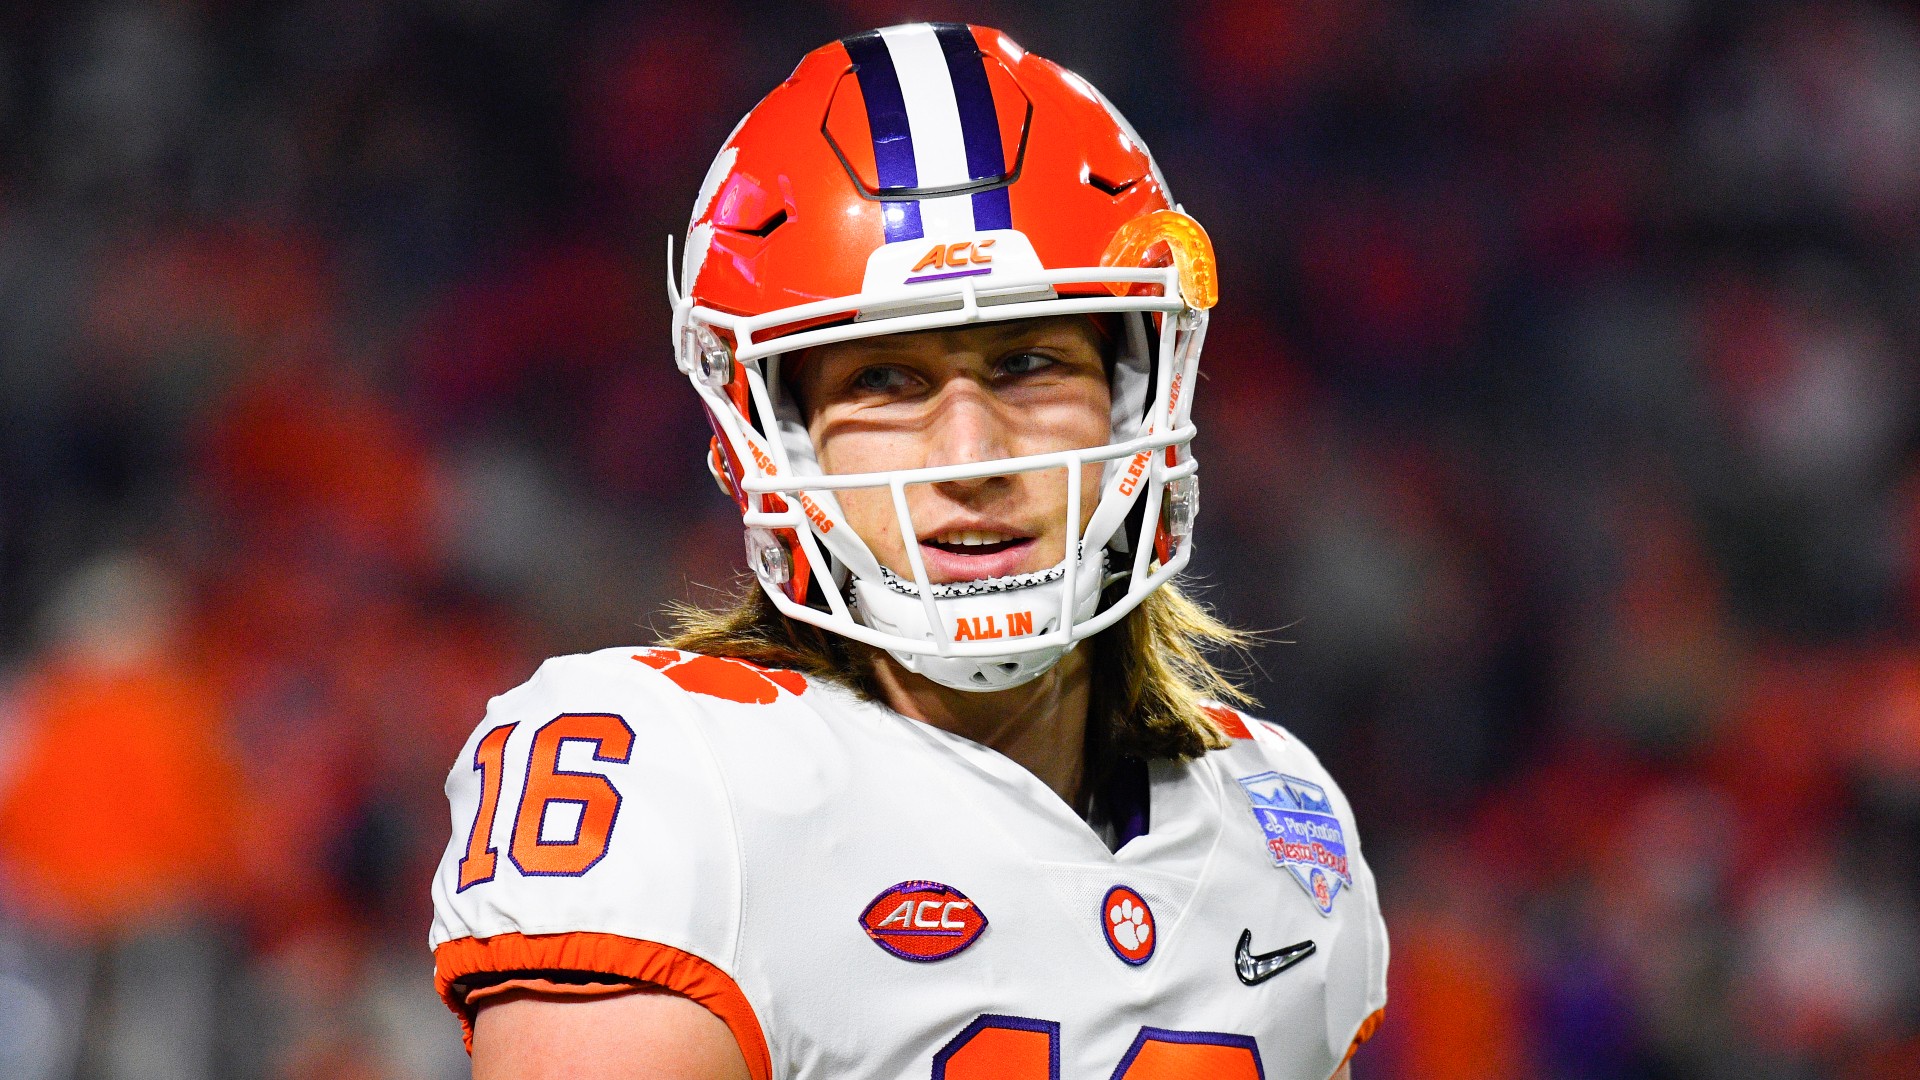 Sugar Bowl Promos: Bet $20, Win $125 if Trevor Lawrence Throws for 1+ Yard, More! article feature image